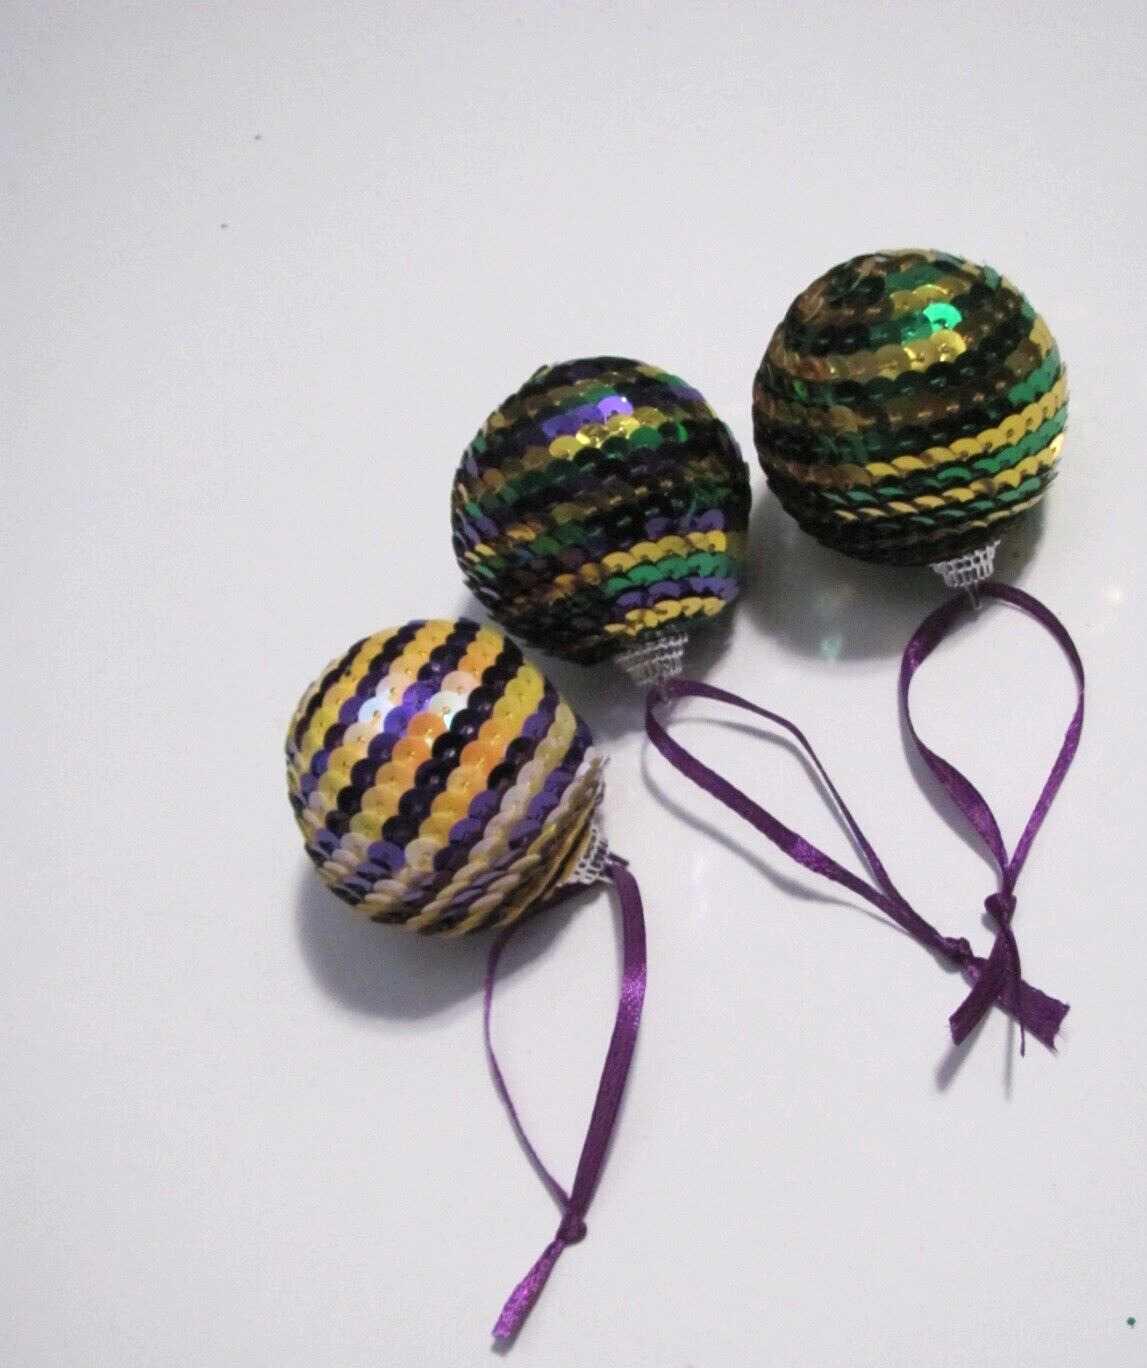 NWOT LOT OF 3 SEQUIN COVERED MARDI GRAS THEMED ROUND ORNAMENTS